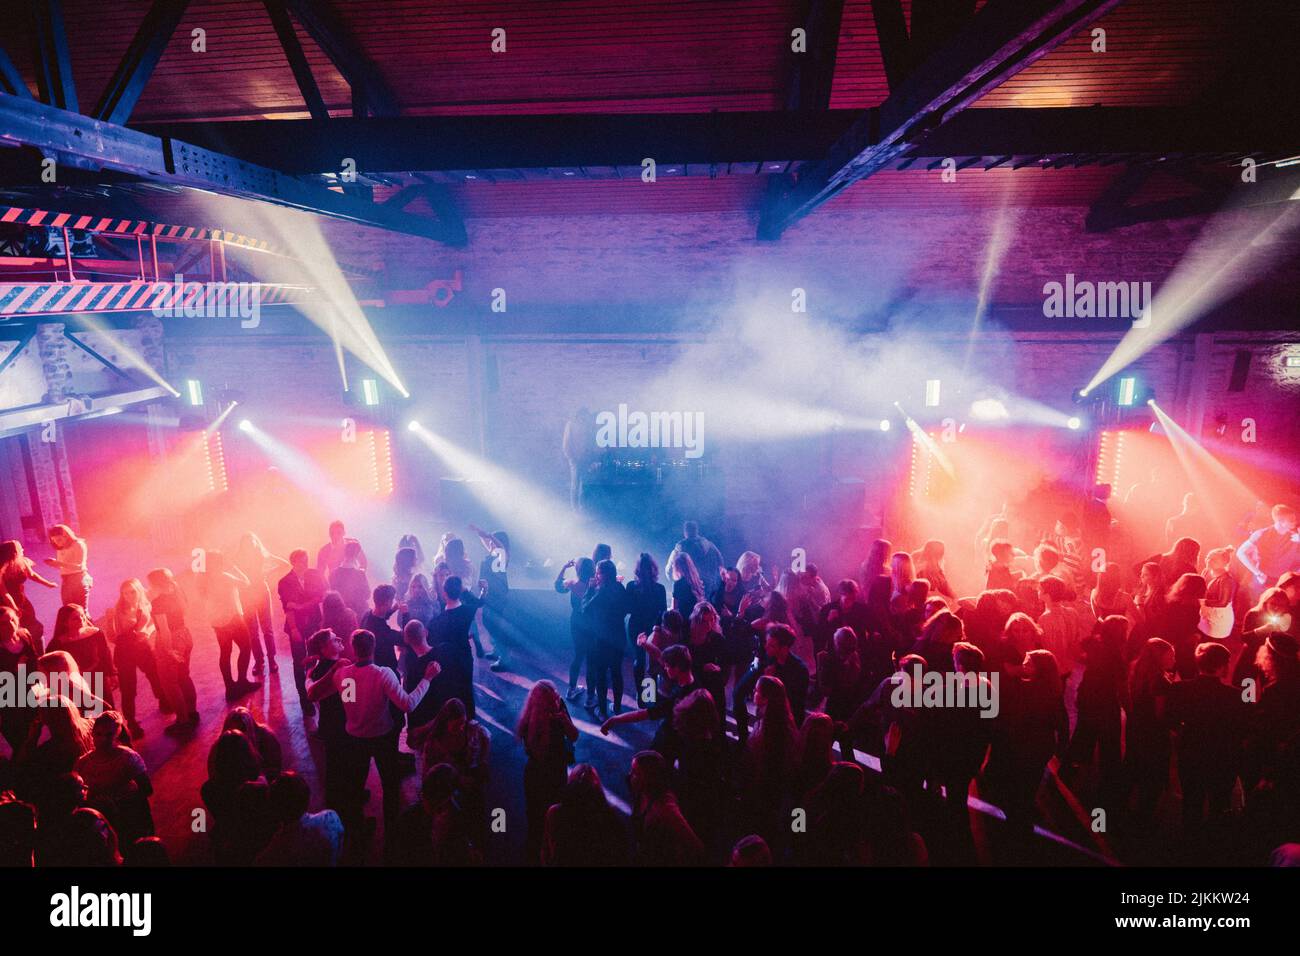 A group of people enjoying their time at a party with colorful lights in a warehouse Stock Photo